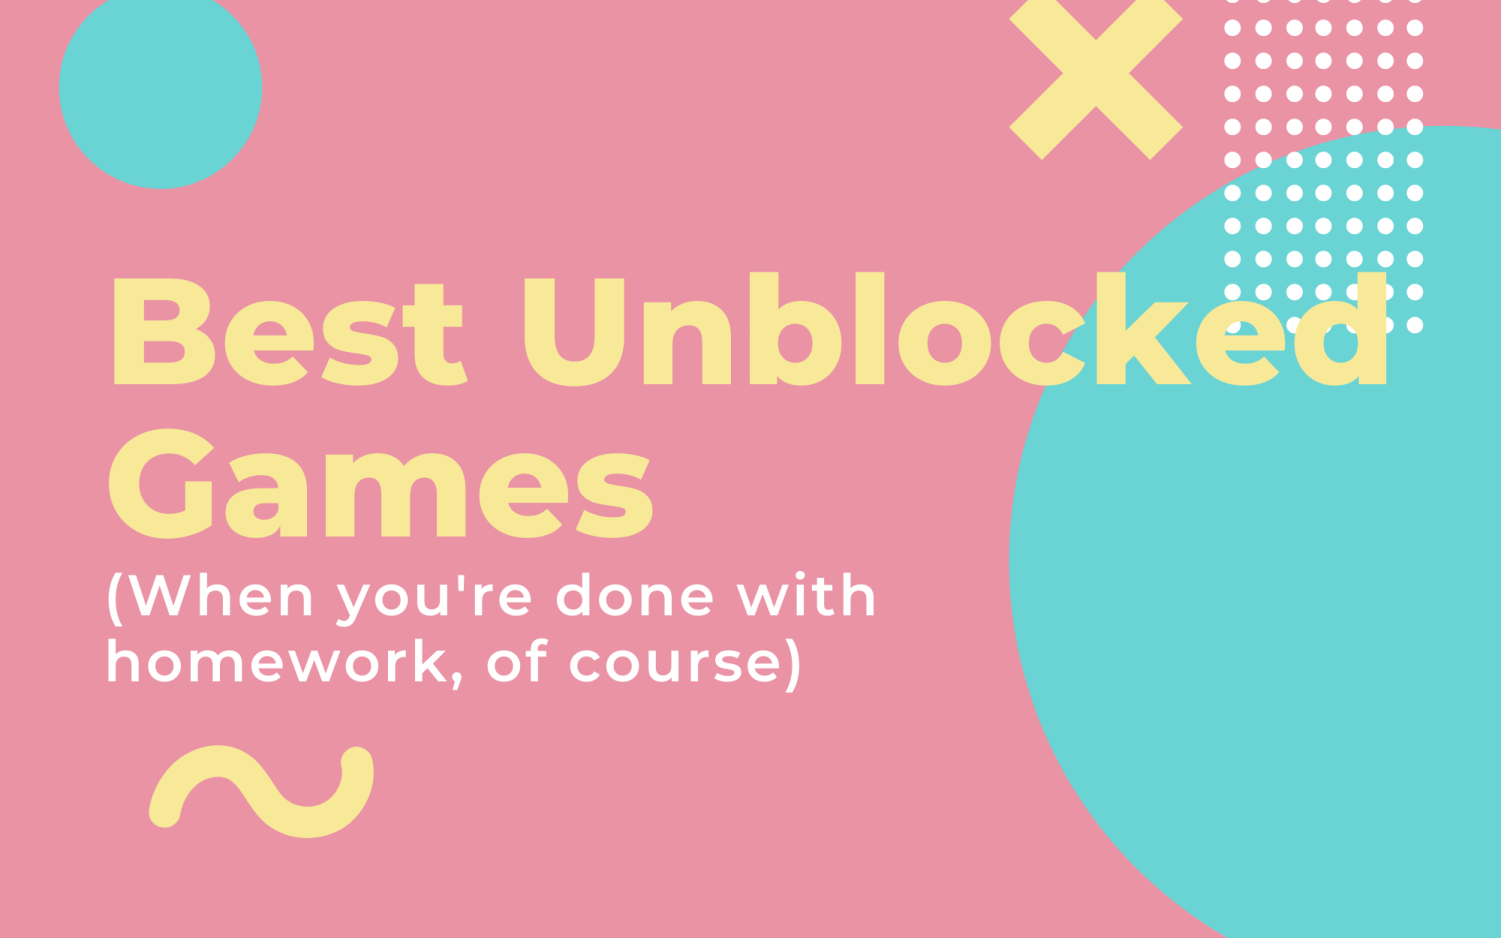 The Secret Unblocked Games World: Online Free Game Collection